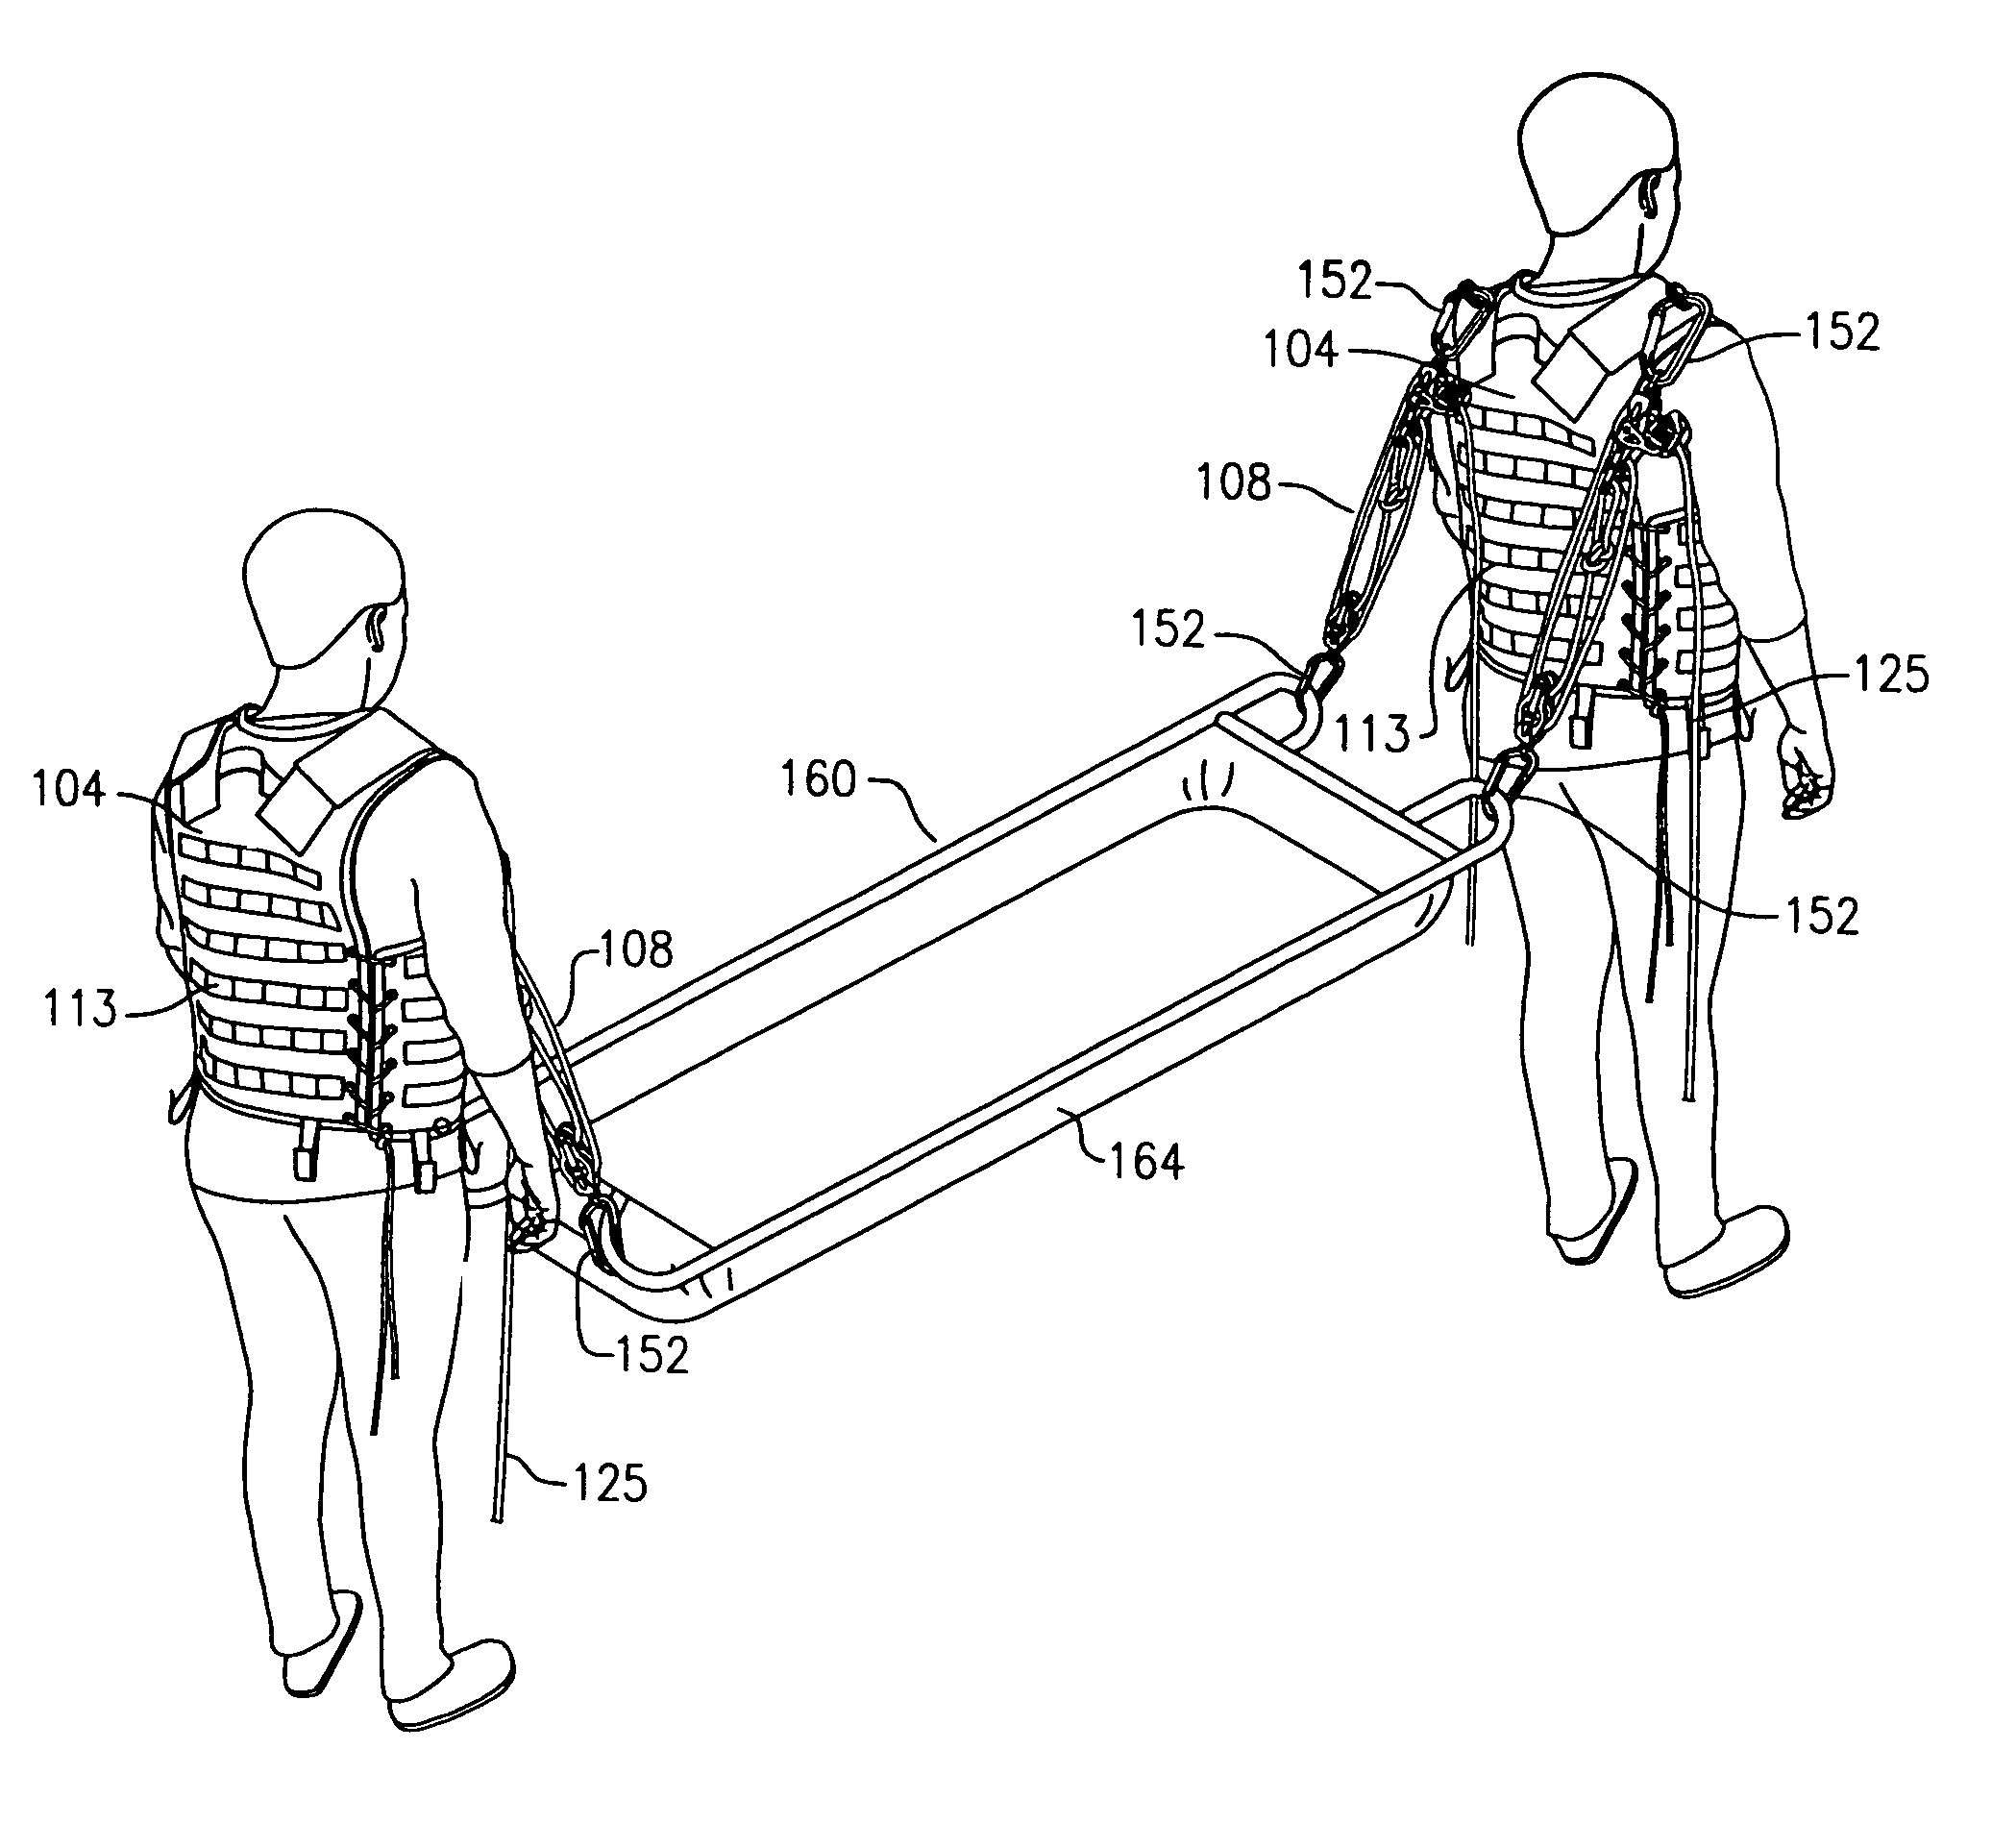 Hands-free lifting and carrying apparatus